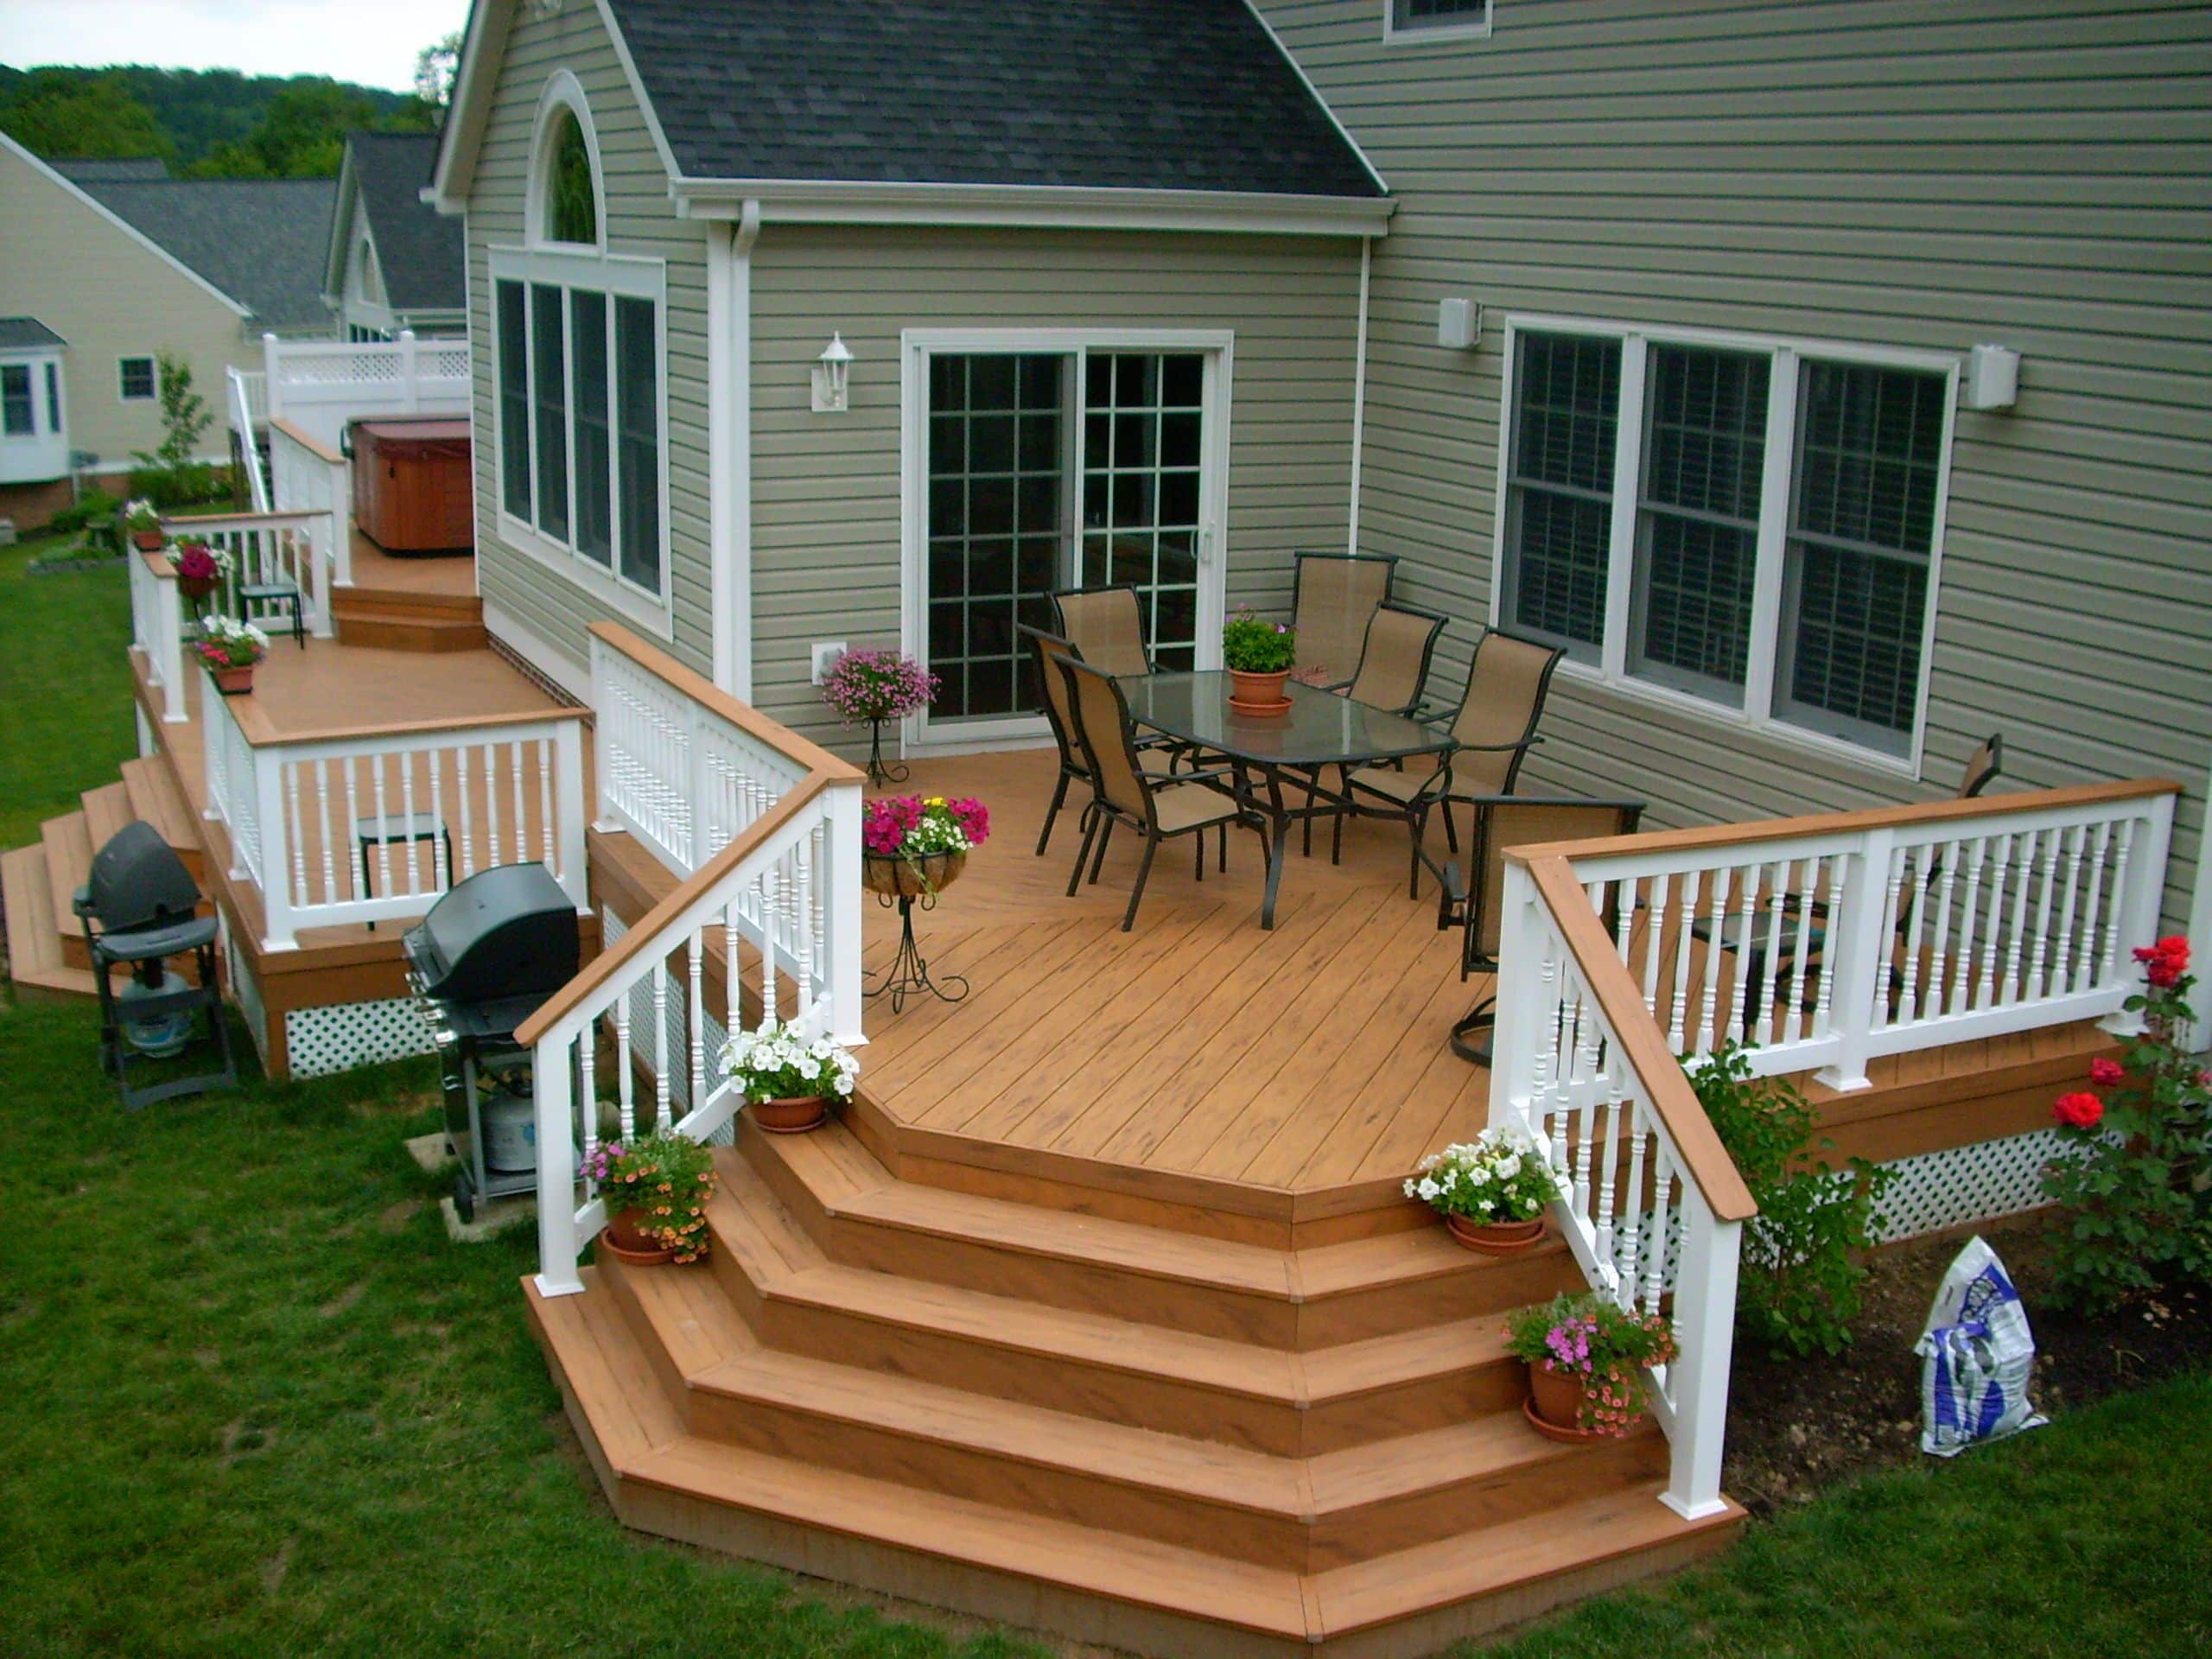 What Is The Difference Between A Patio And A Porch